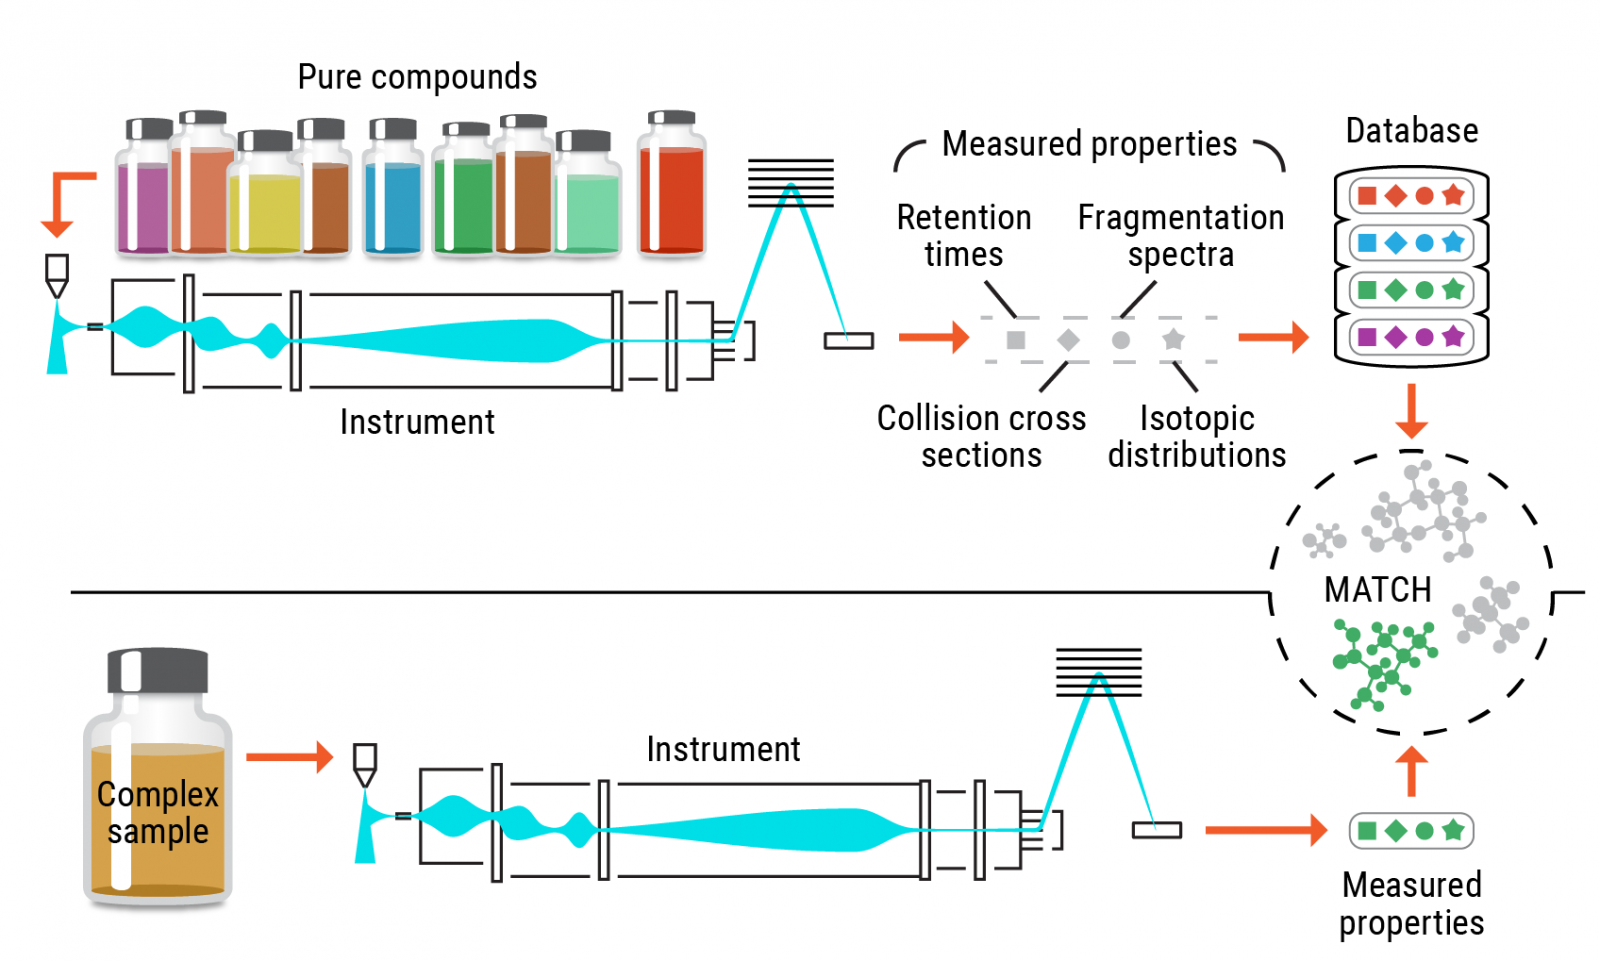 Illustration of the conventional metabolite identification process